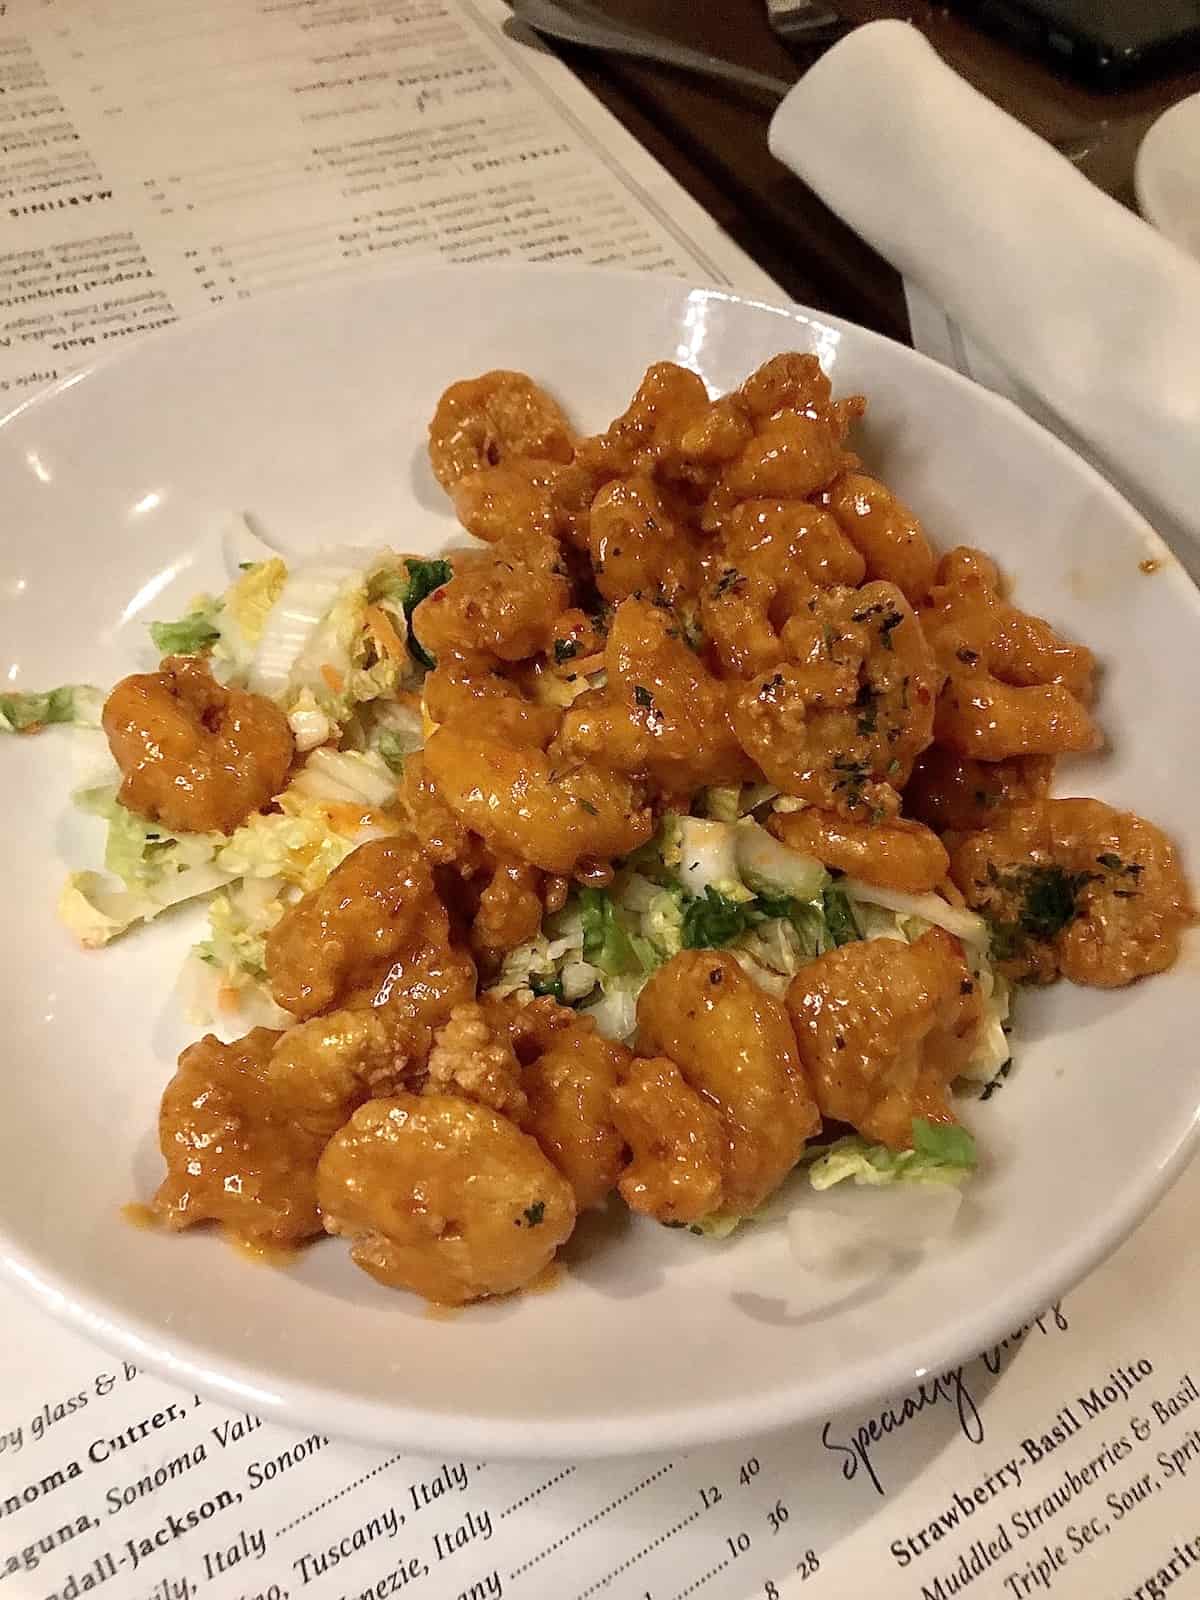 Fried shrimp with spicy sauce on lettuce on a white plate on a menu in a restaurant.